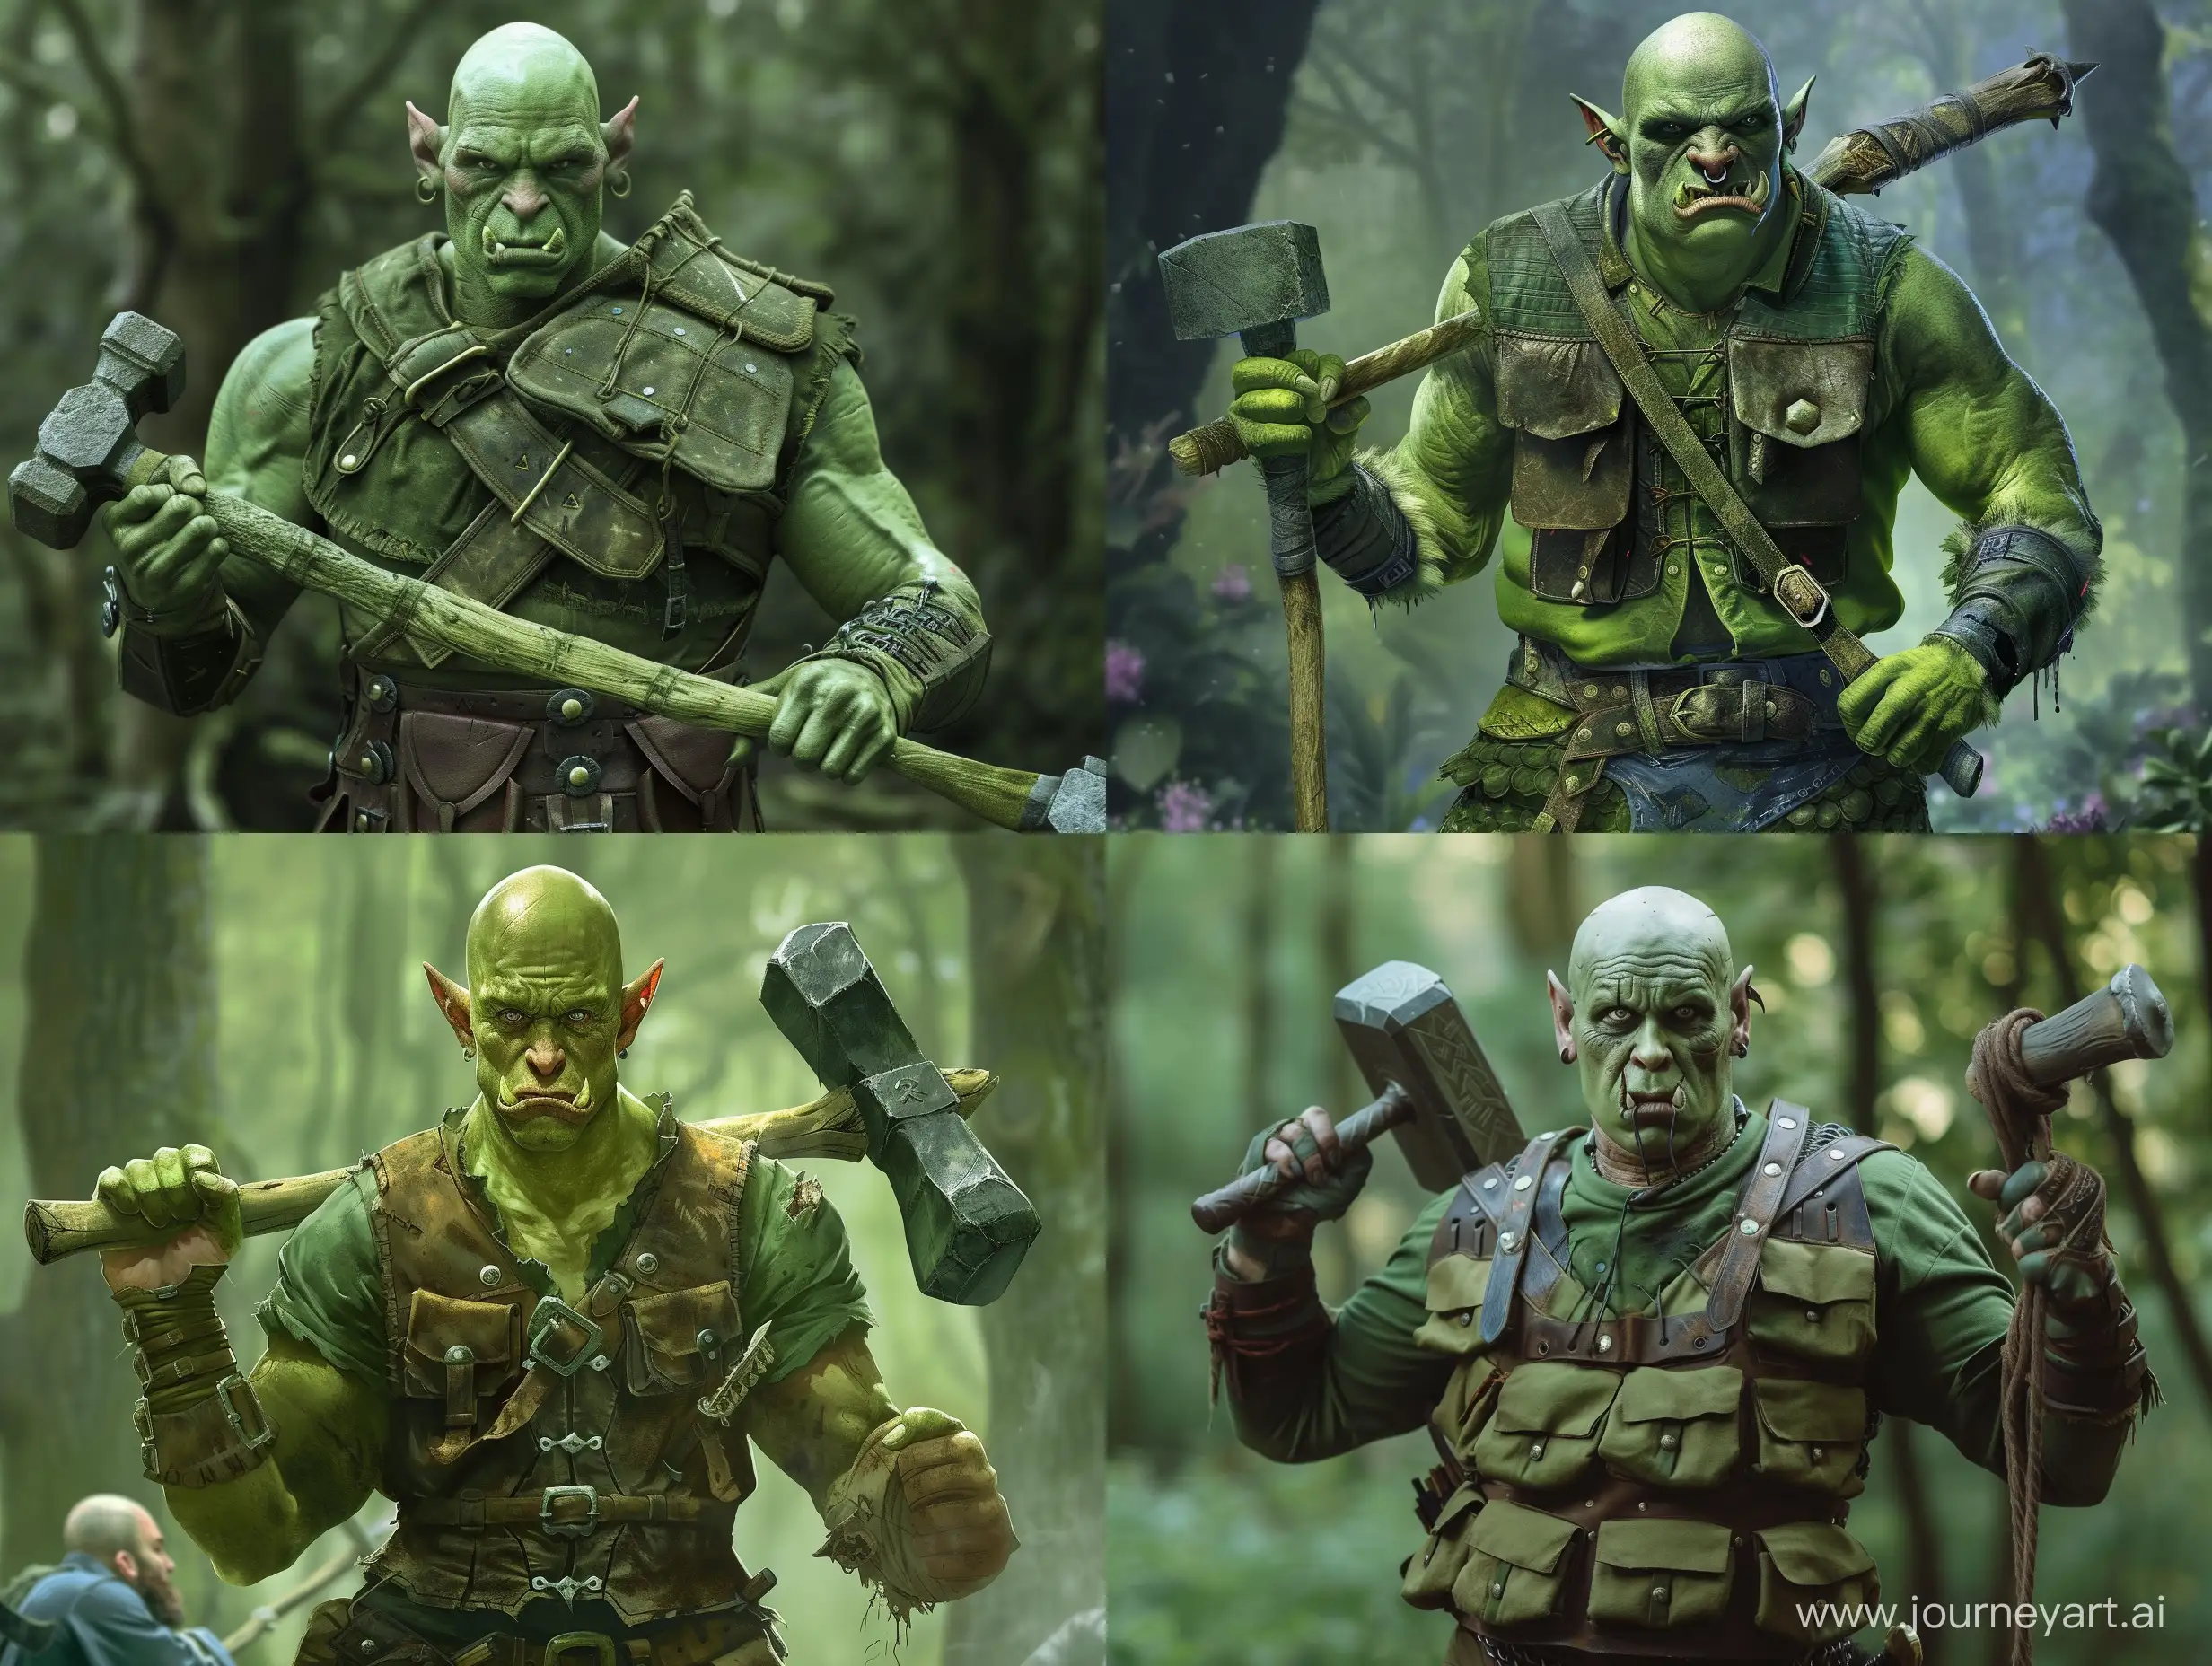 Formidable-Green-Orc-Warrior-Defending-the-Forest